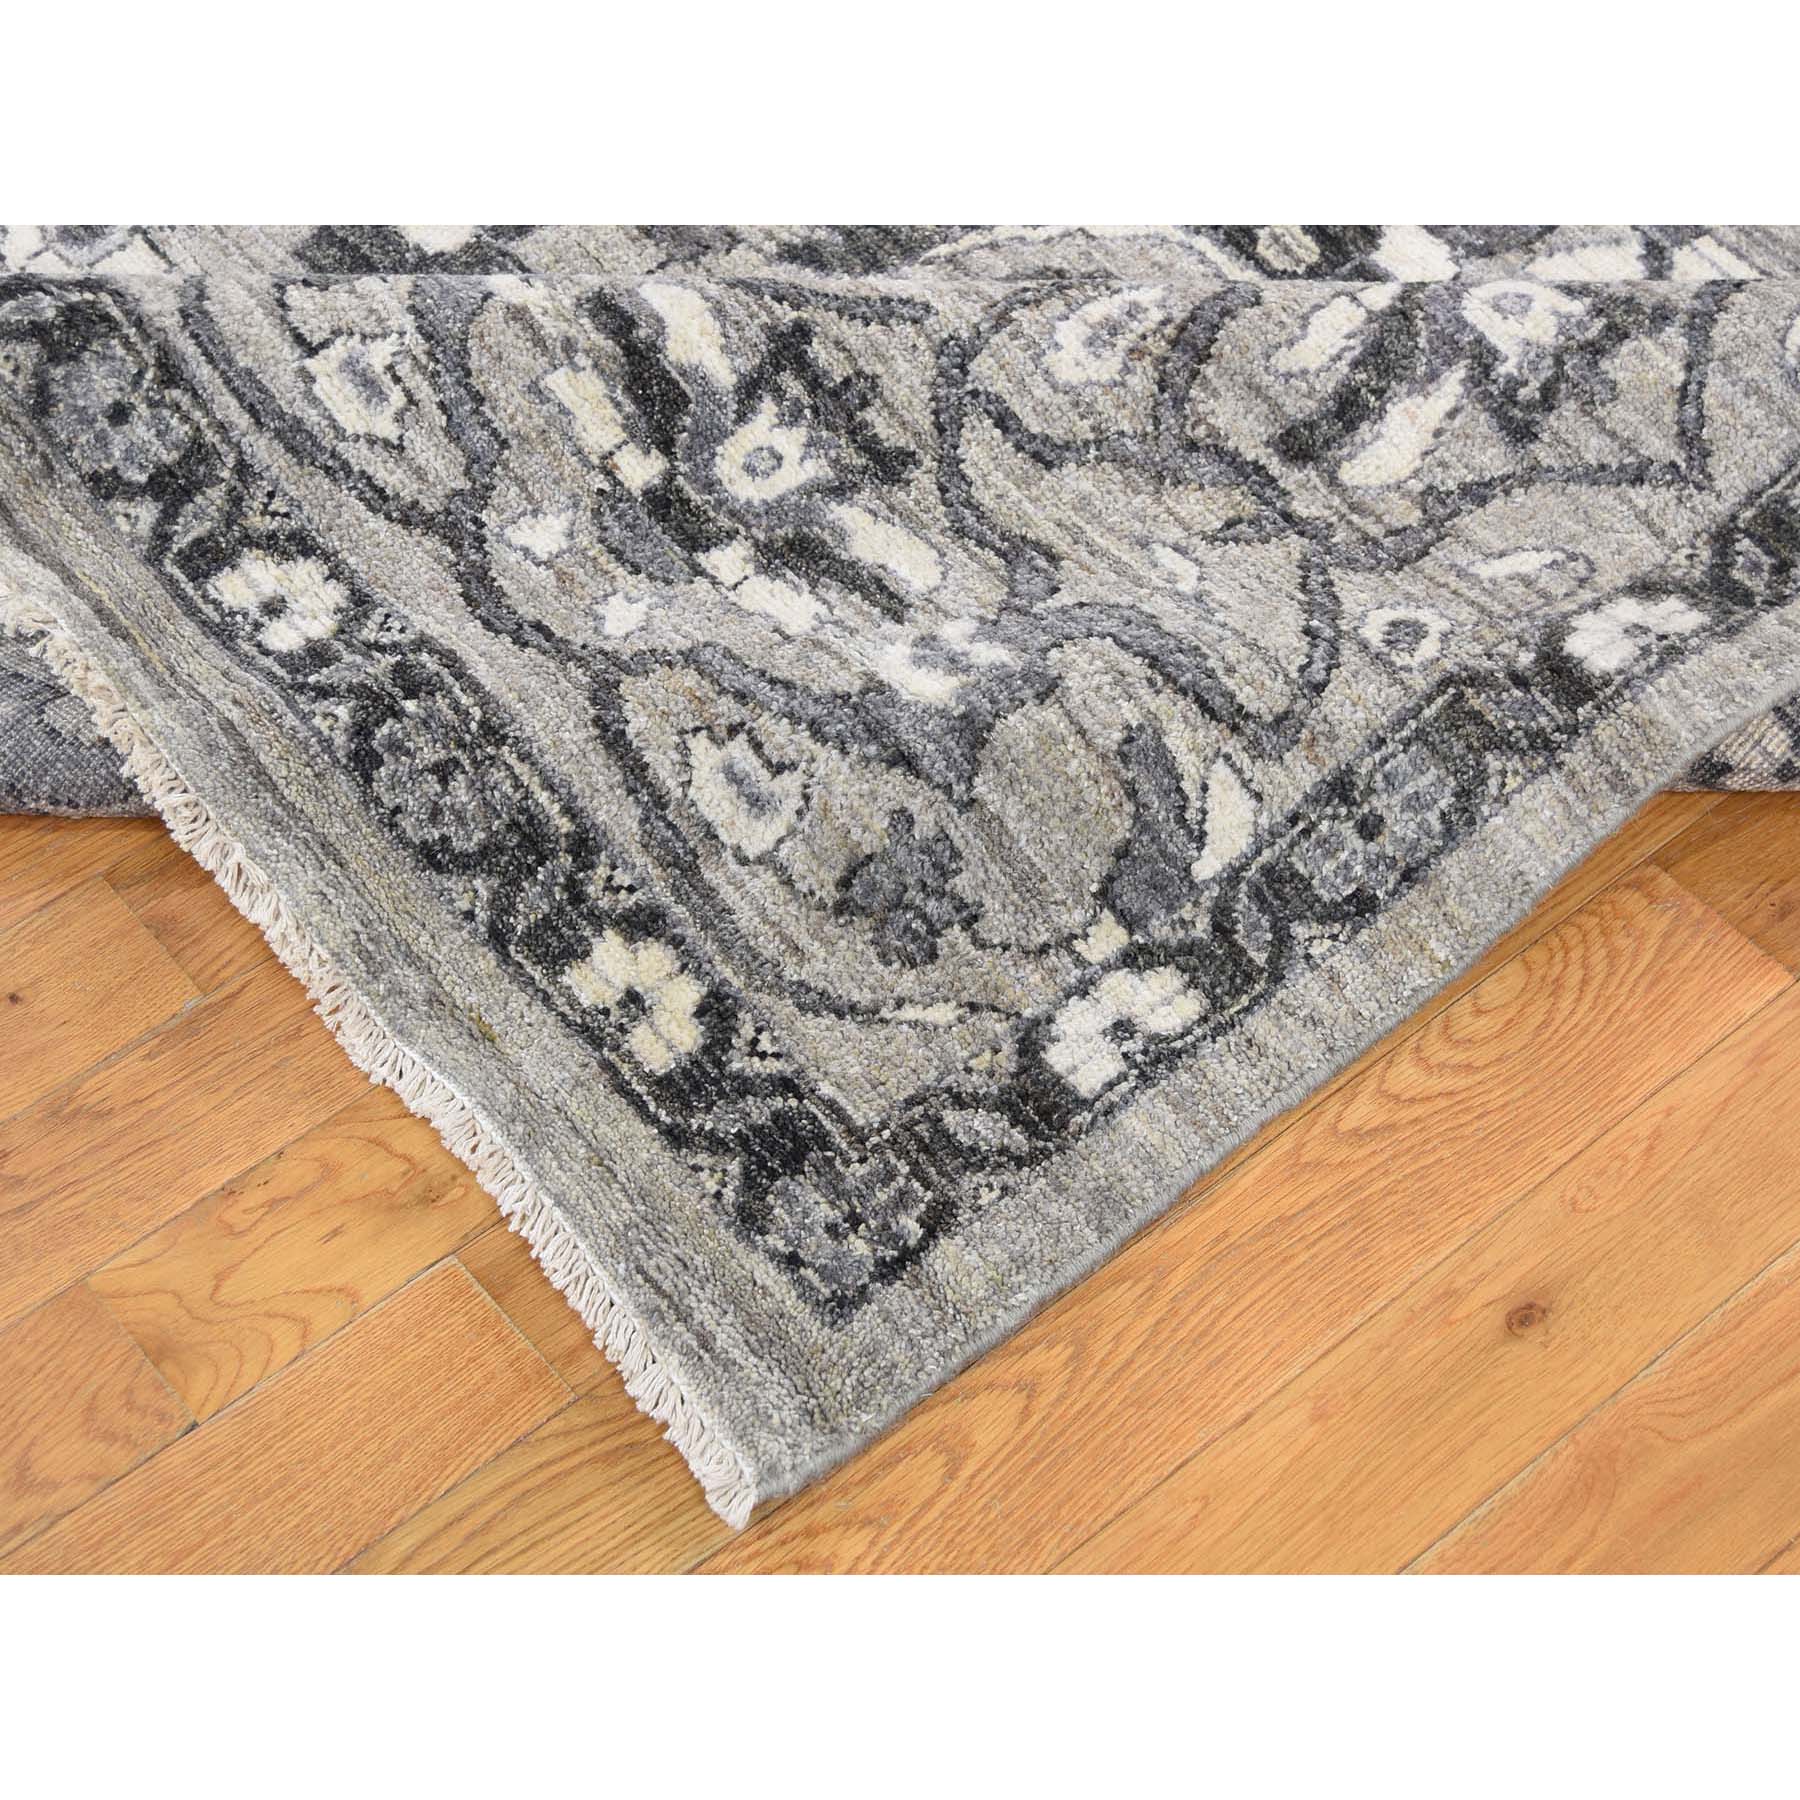 9-x11-7  Heriz Pure Wool with Natural Colors Hand-Knotted Oriental Rug 